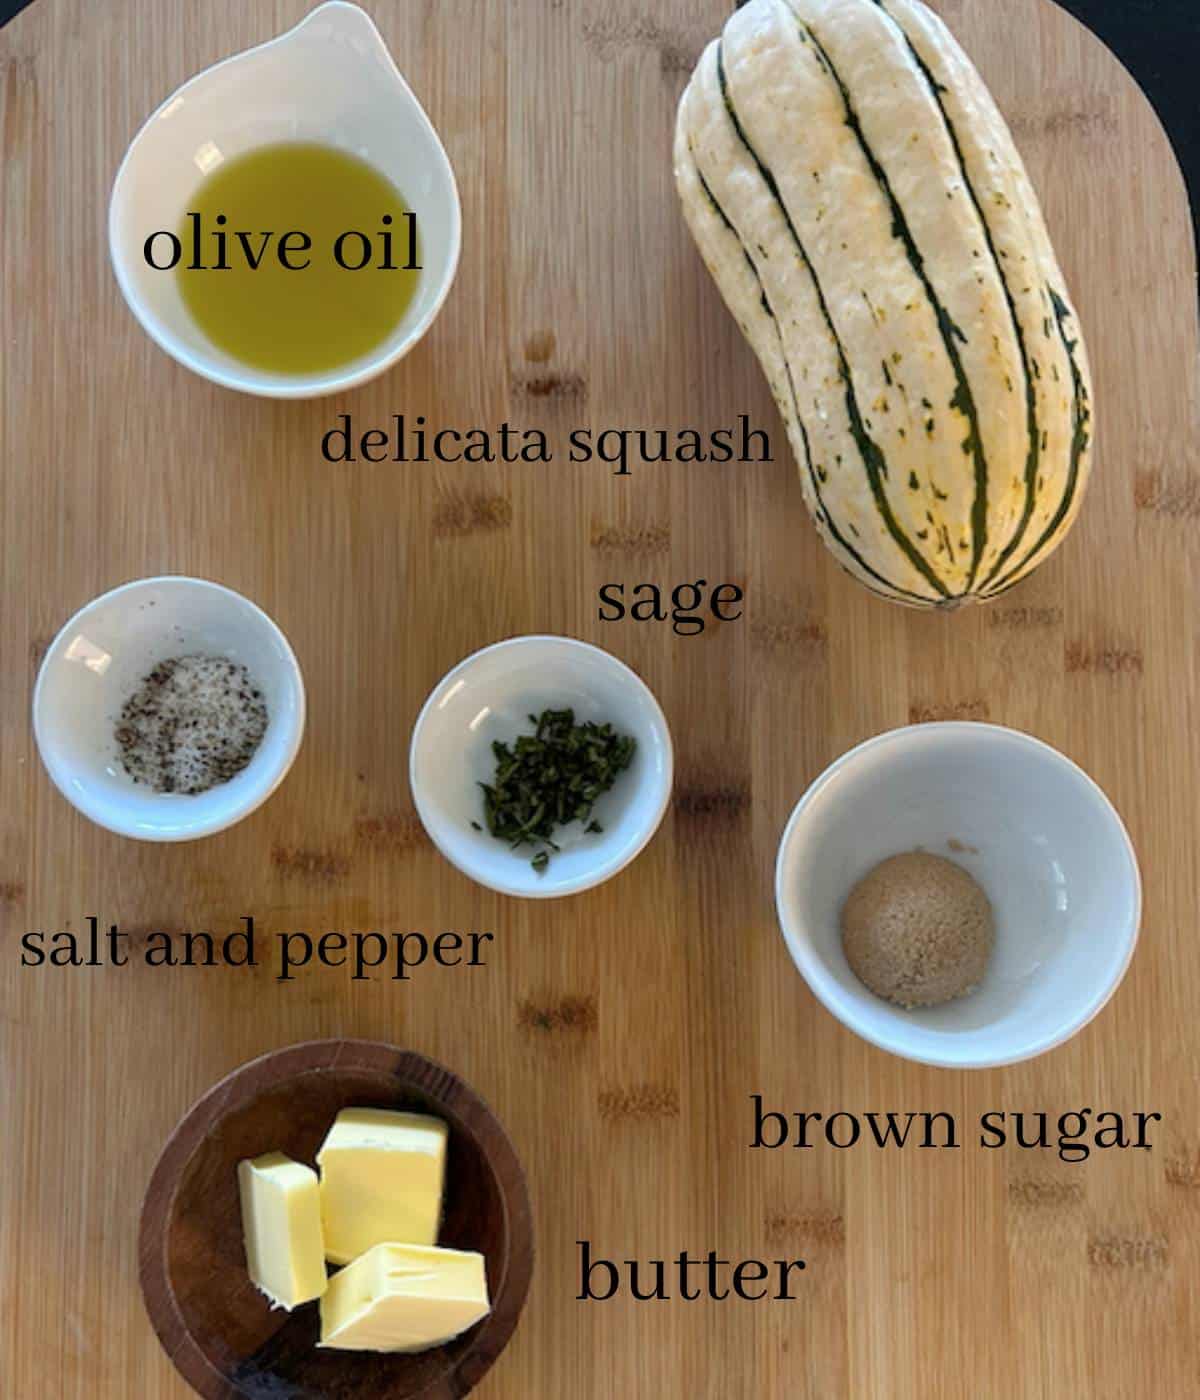 Ingredients for Delicata Squash recipe on cutting board.